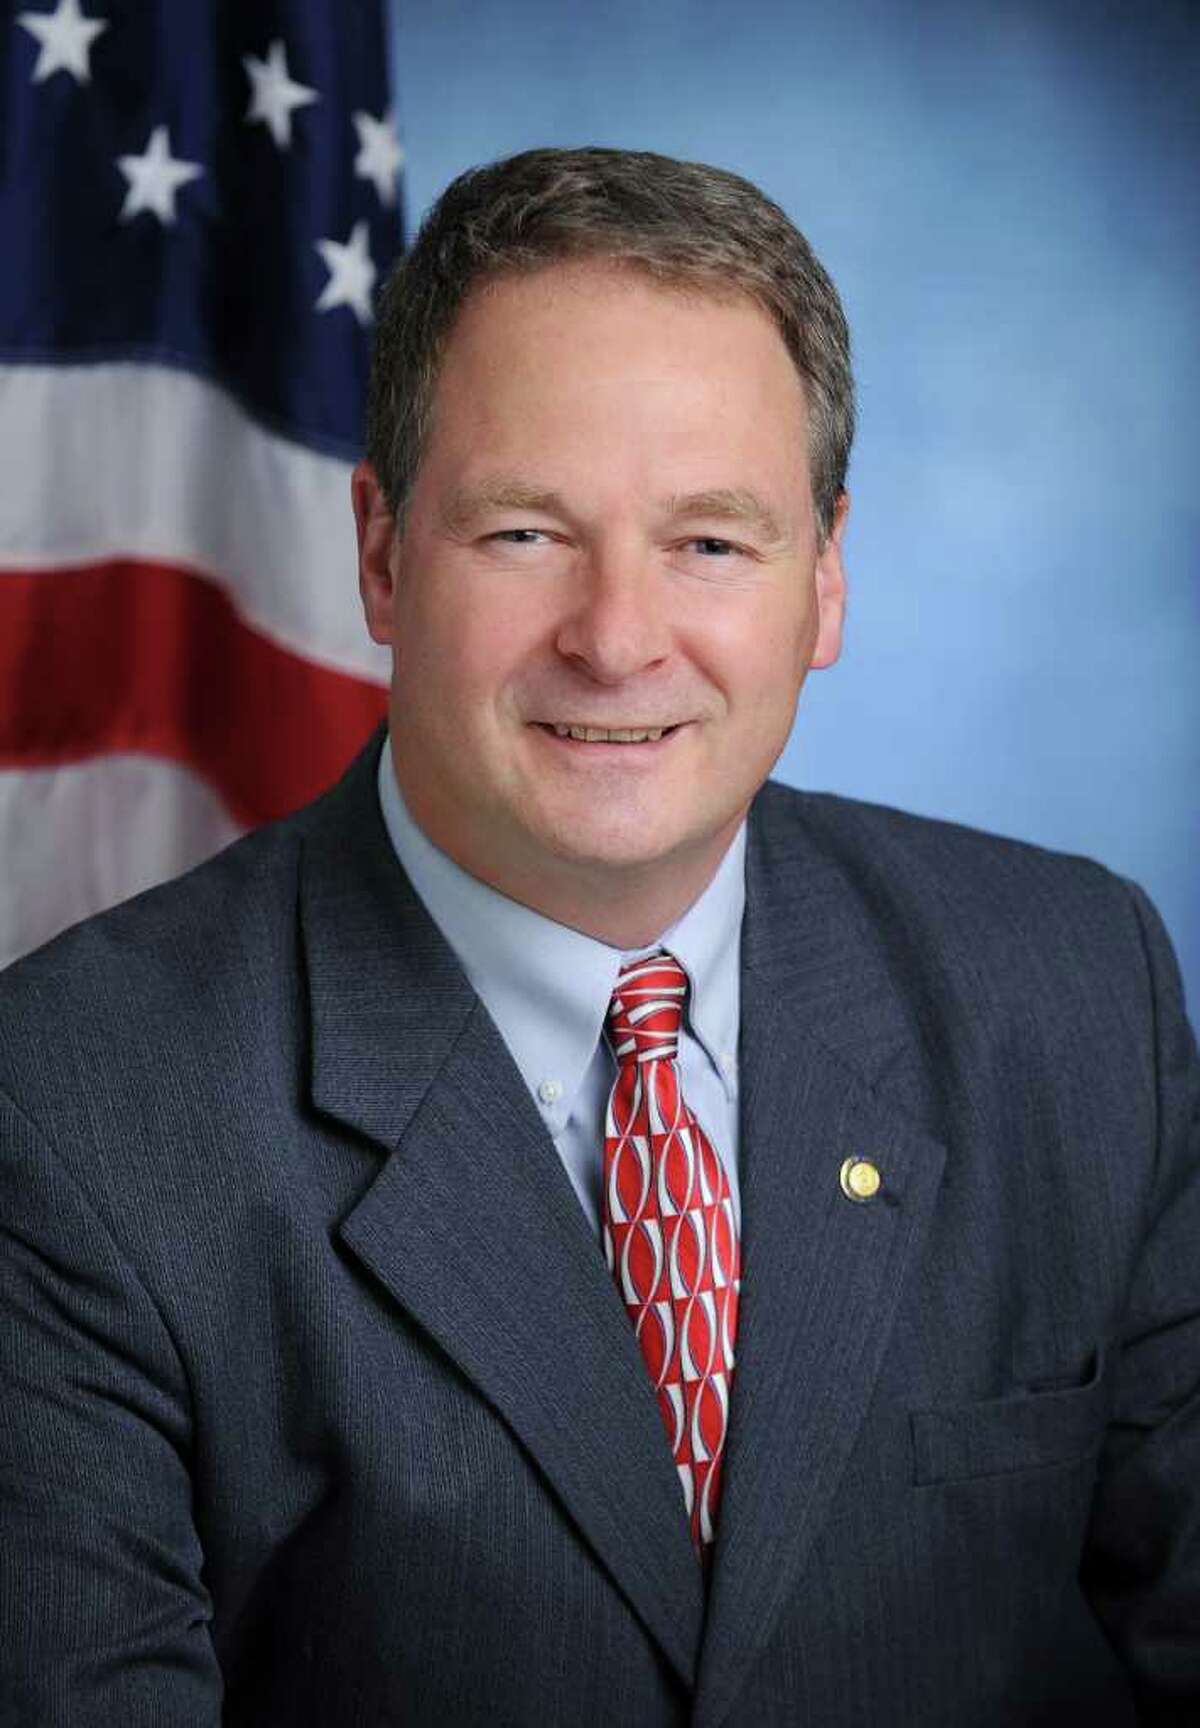 Assemblyman Tim Gordon, I-Bethlehem, has been shadowed by an opposition tracker, who recorded some of his open events.